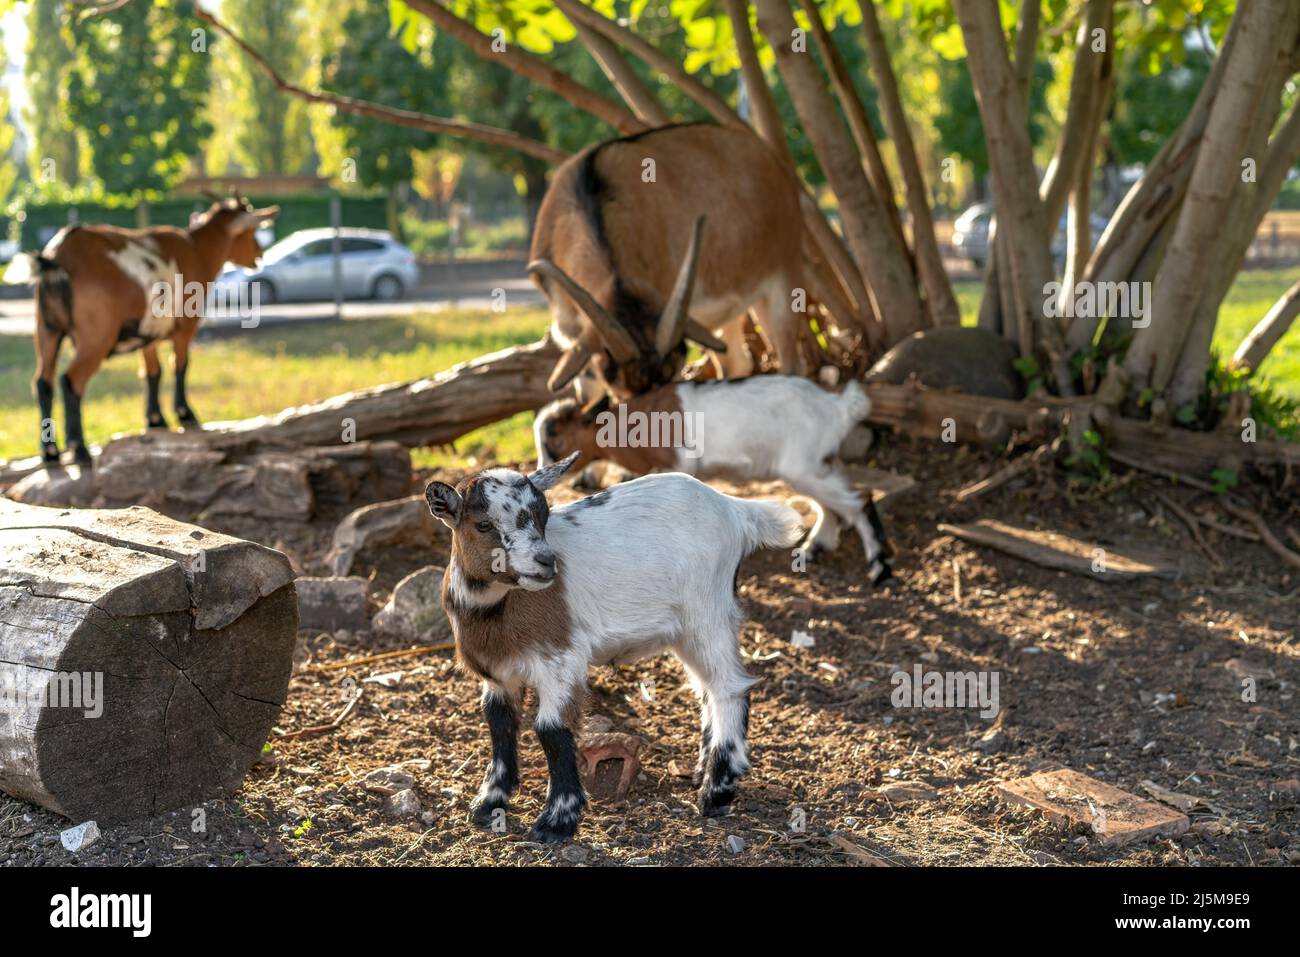 Swiss goats outside in a garden under early evening sunshine Stock Photo